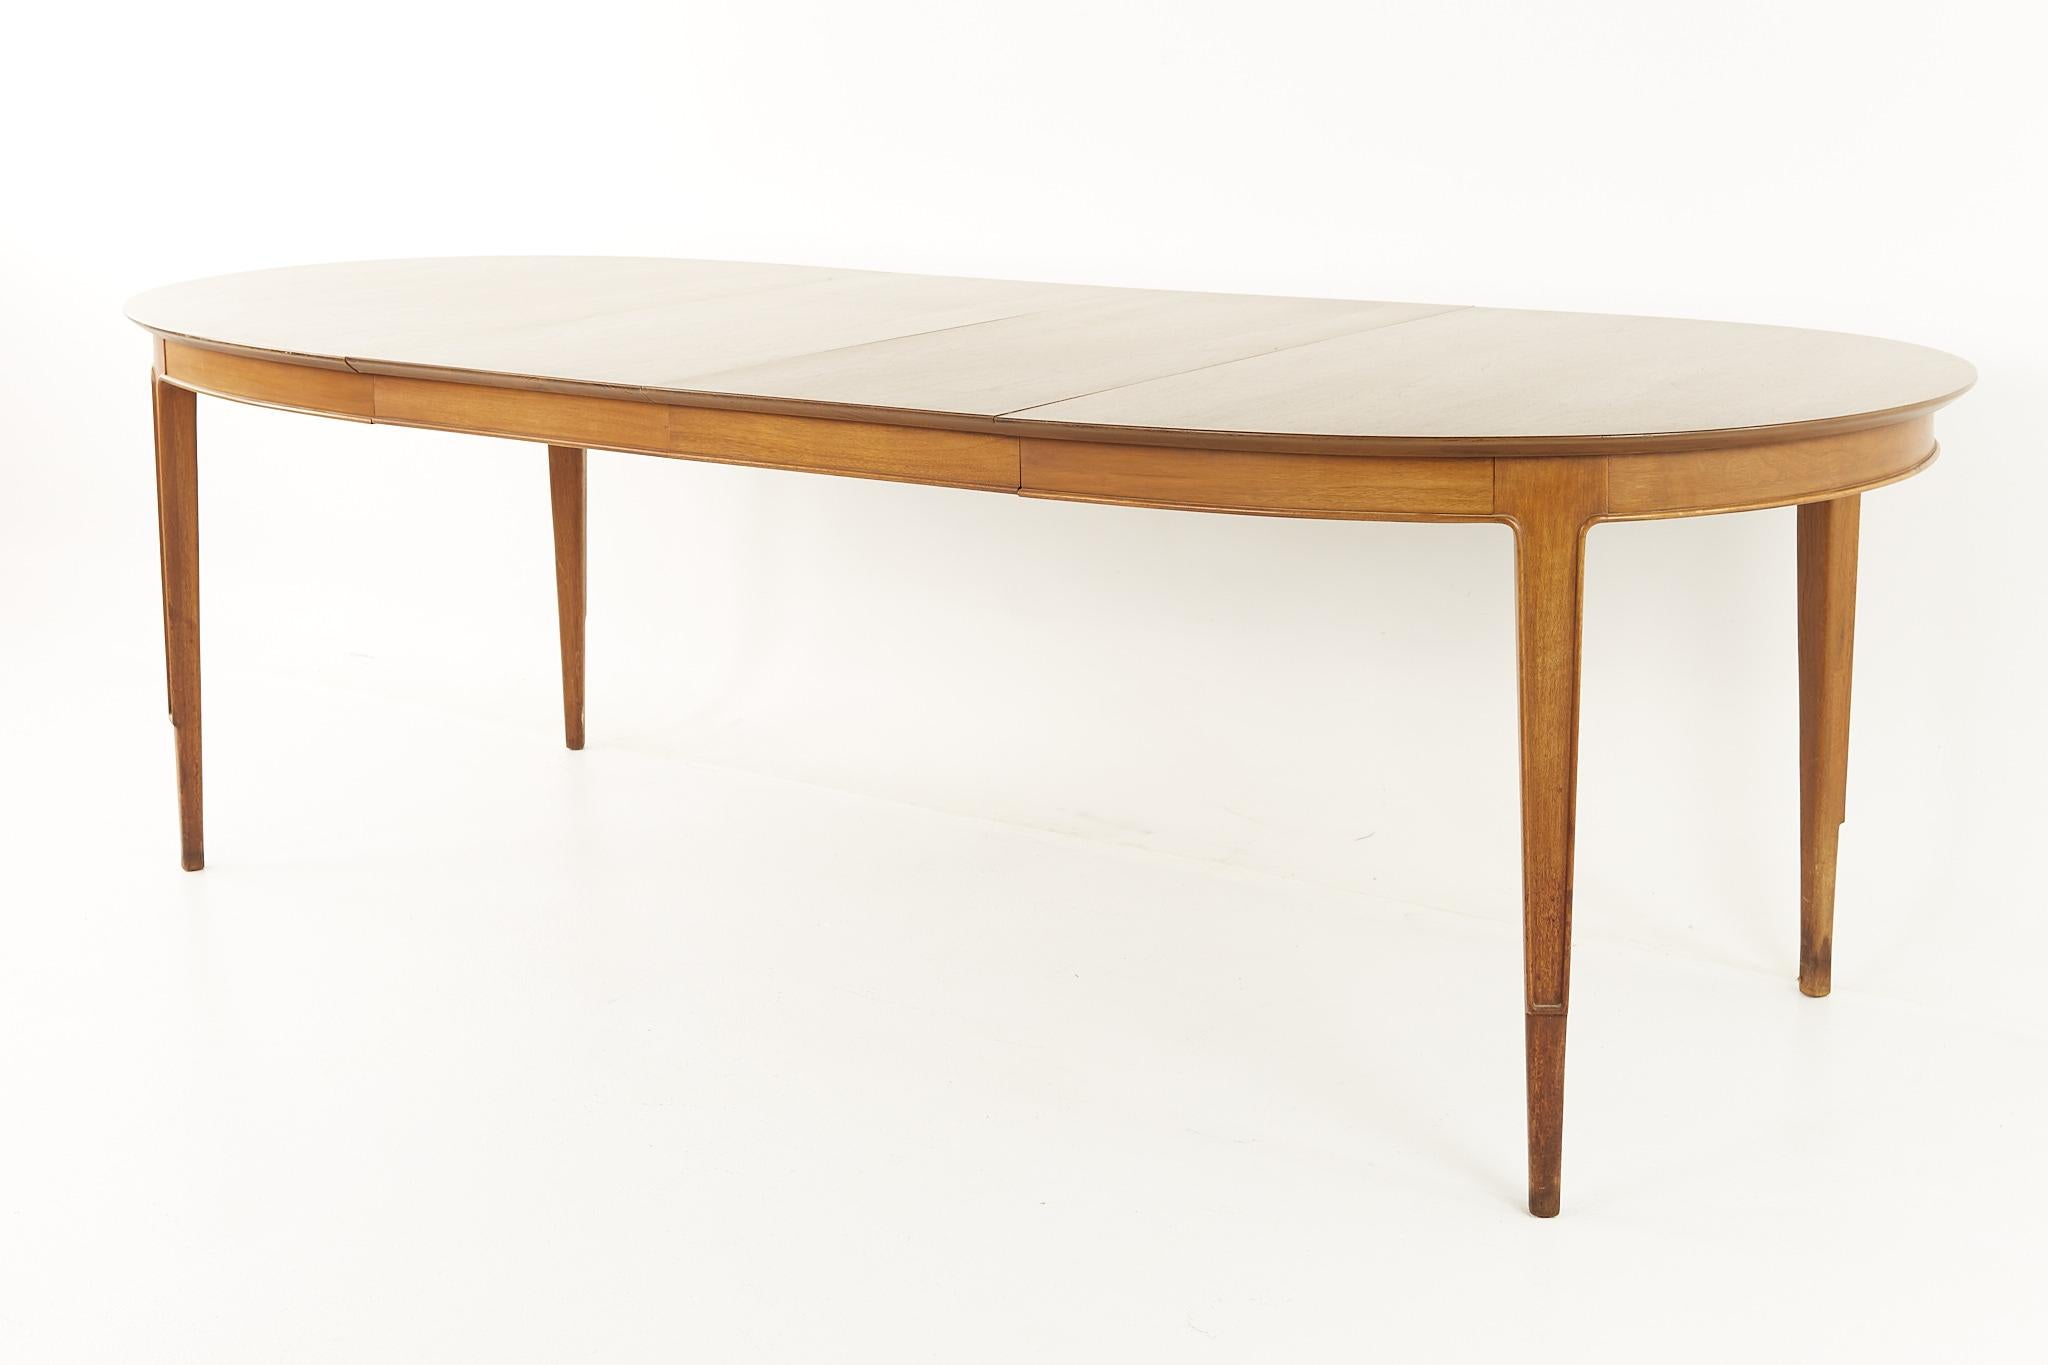 Mount Airy Janus Mid Century Dining Table with 2 Leaves 6